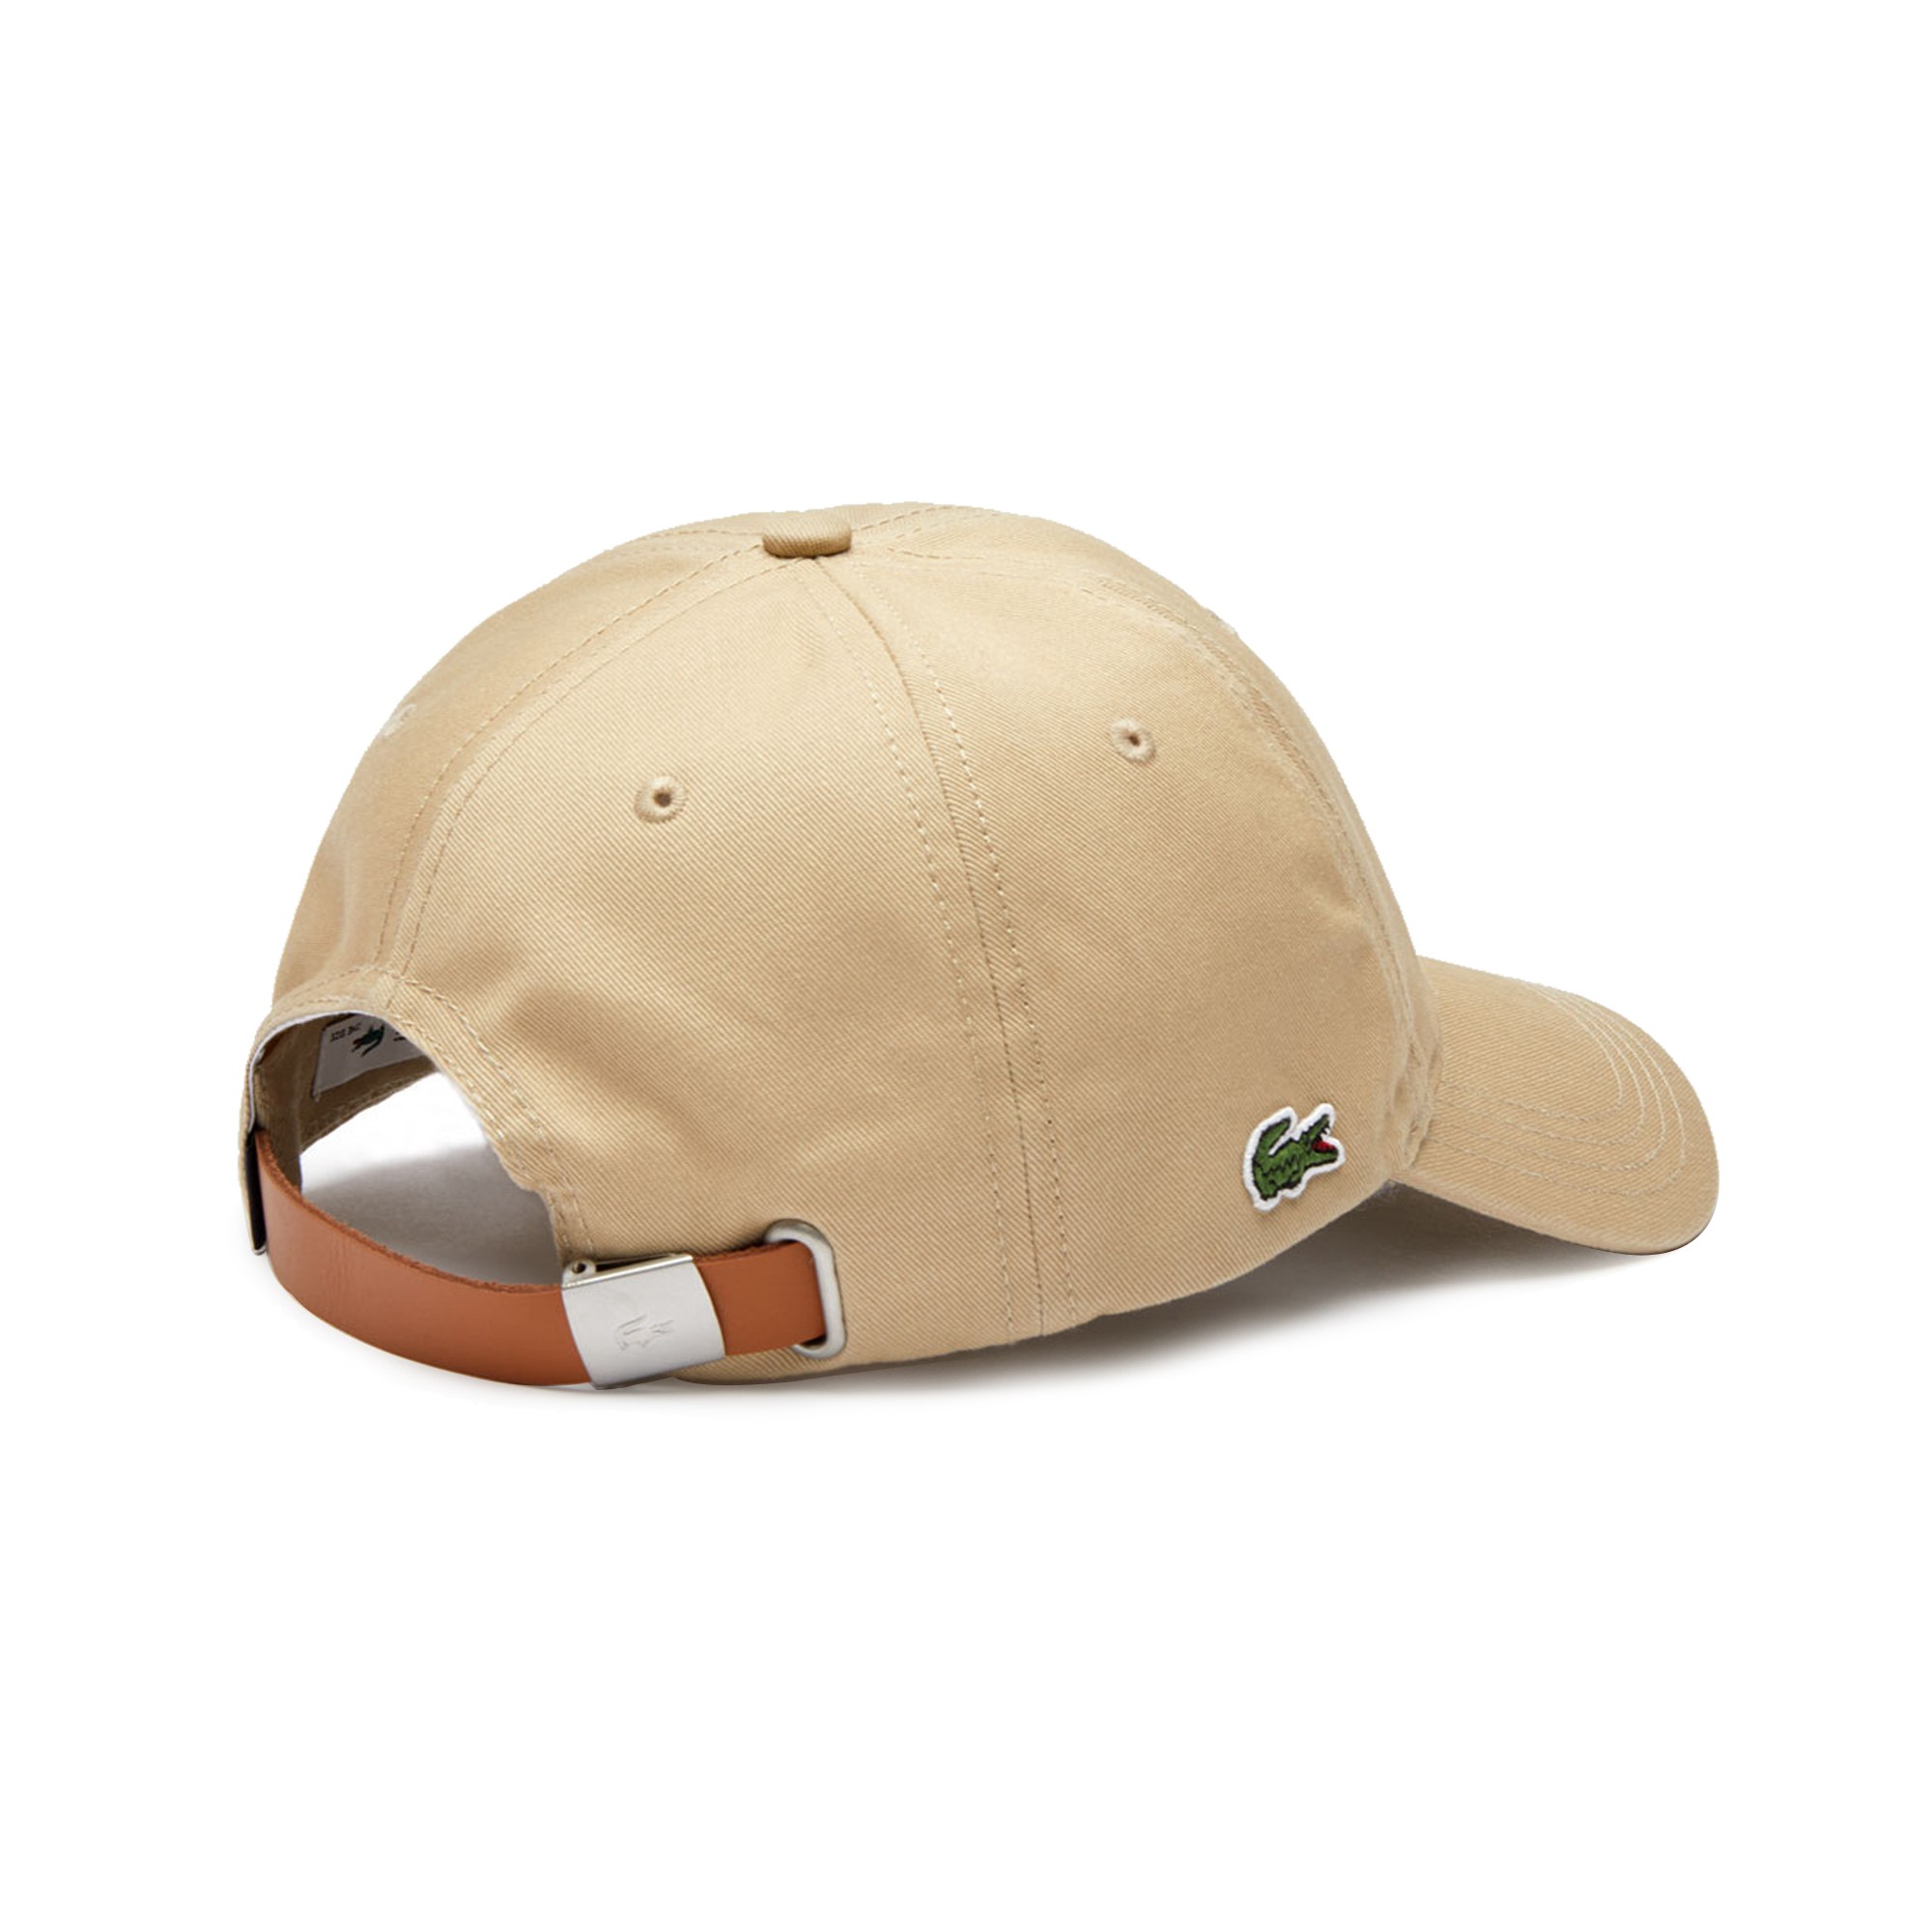 02S VIENNOIS and visors RK4709-00 Caps LACOSTE